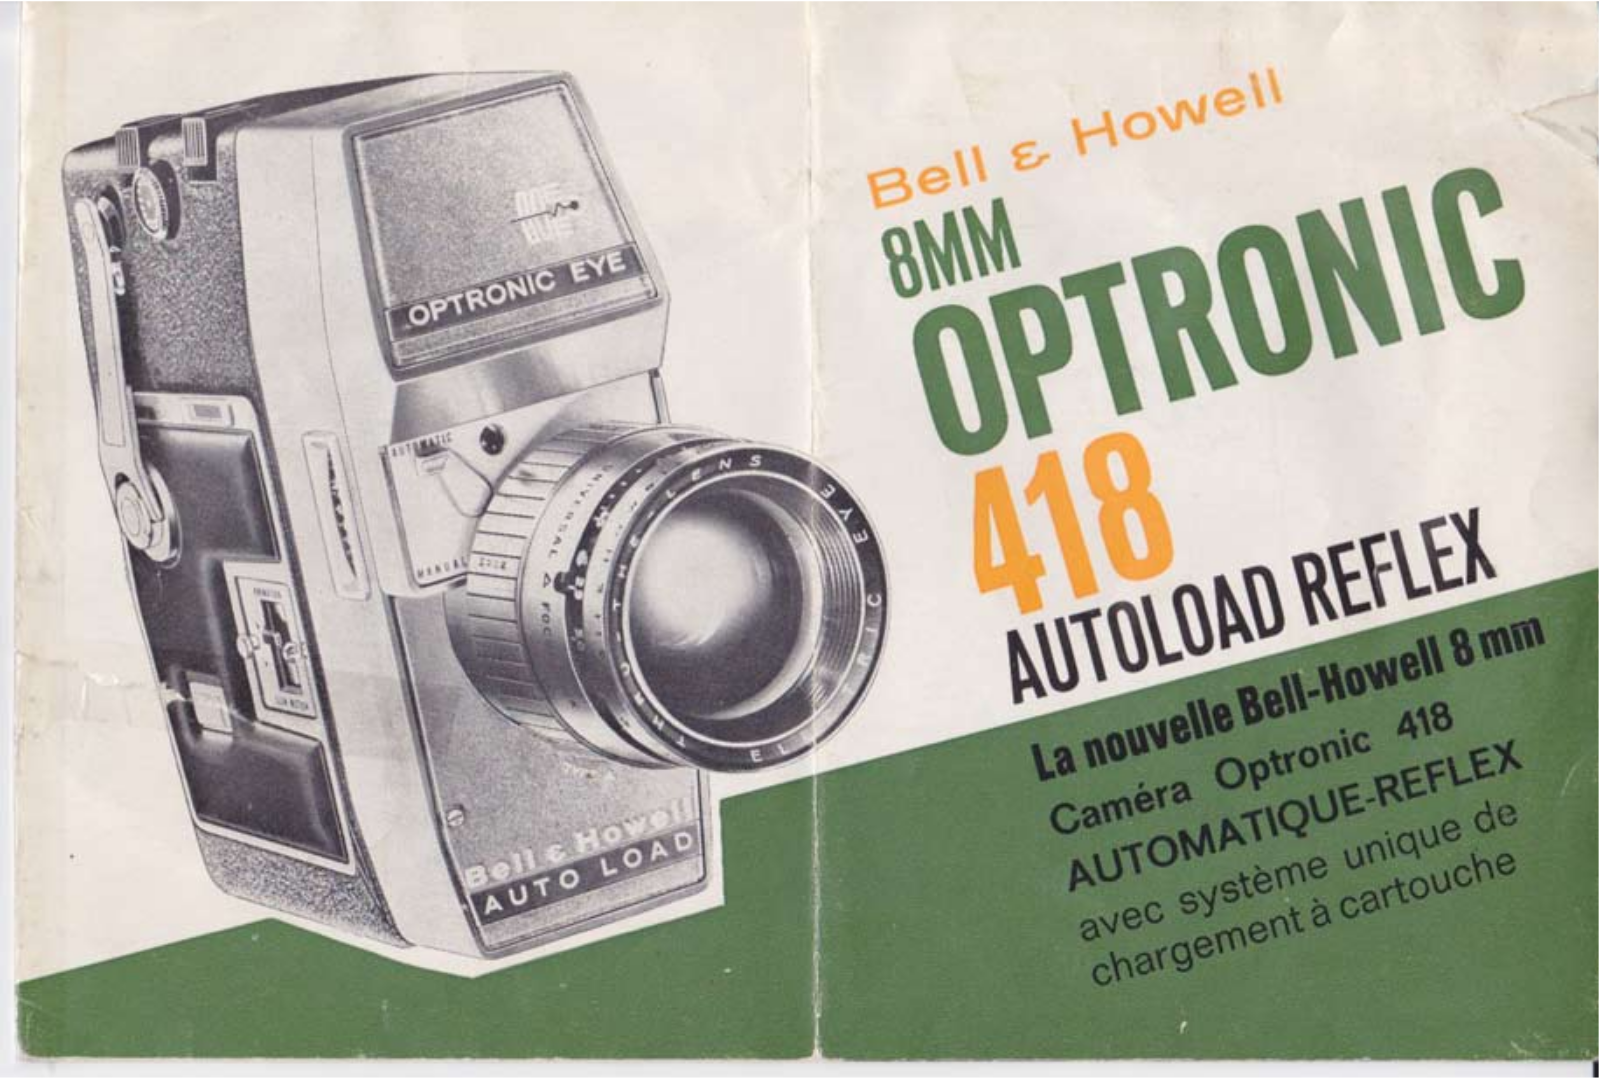 BELL & HOWELL CAMERA 8MM OPTRONIC 418 User Manual